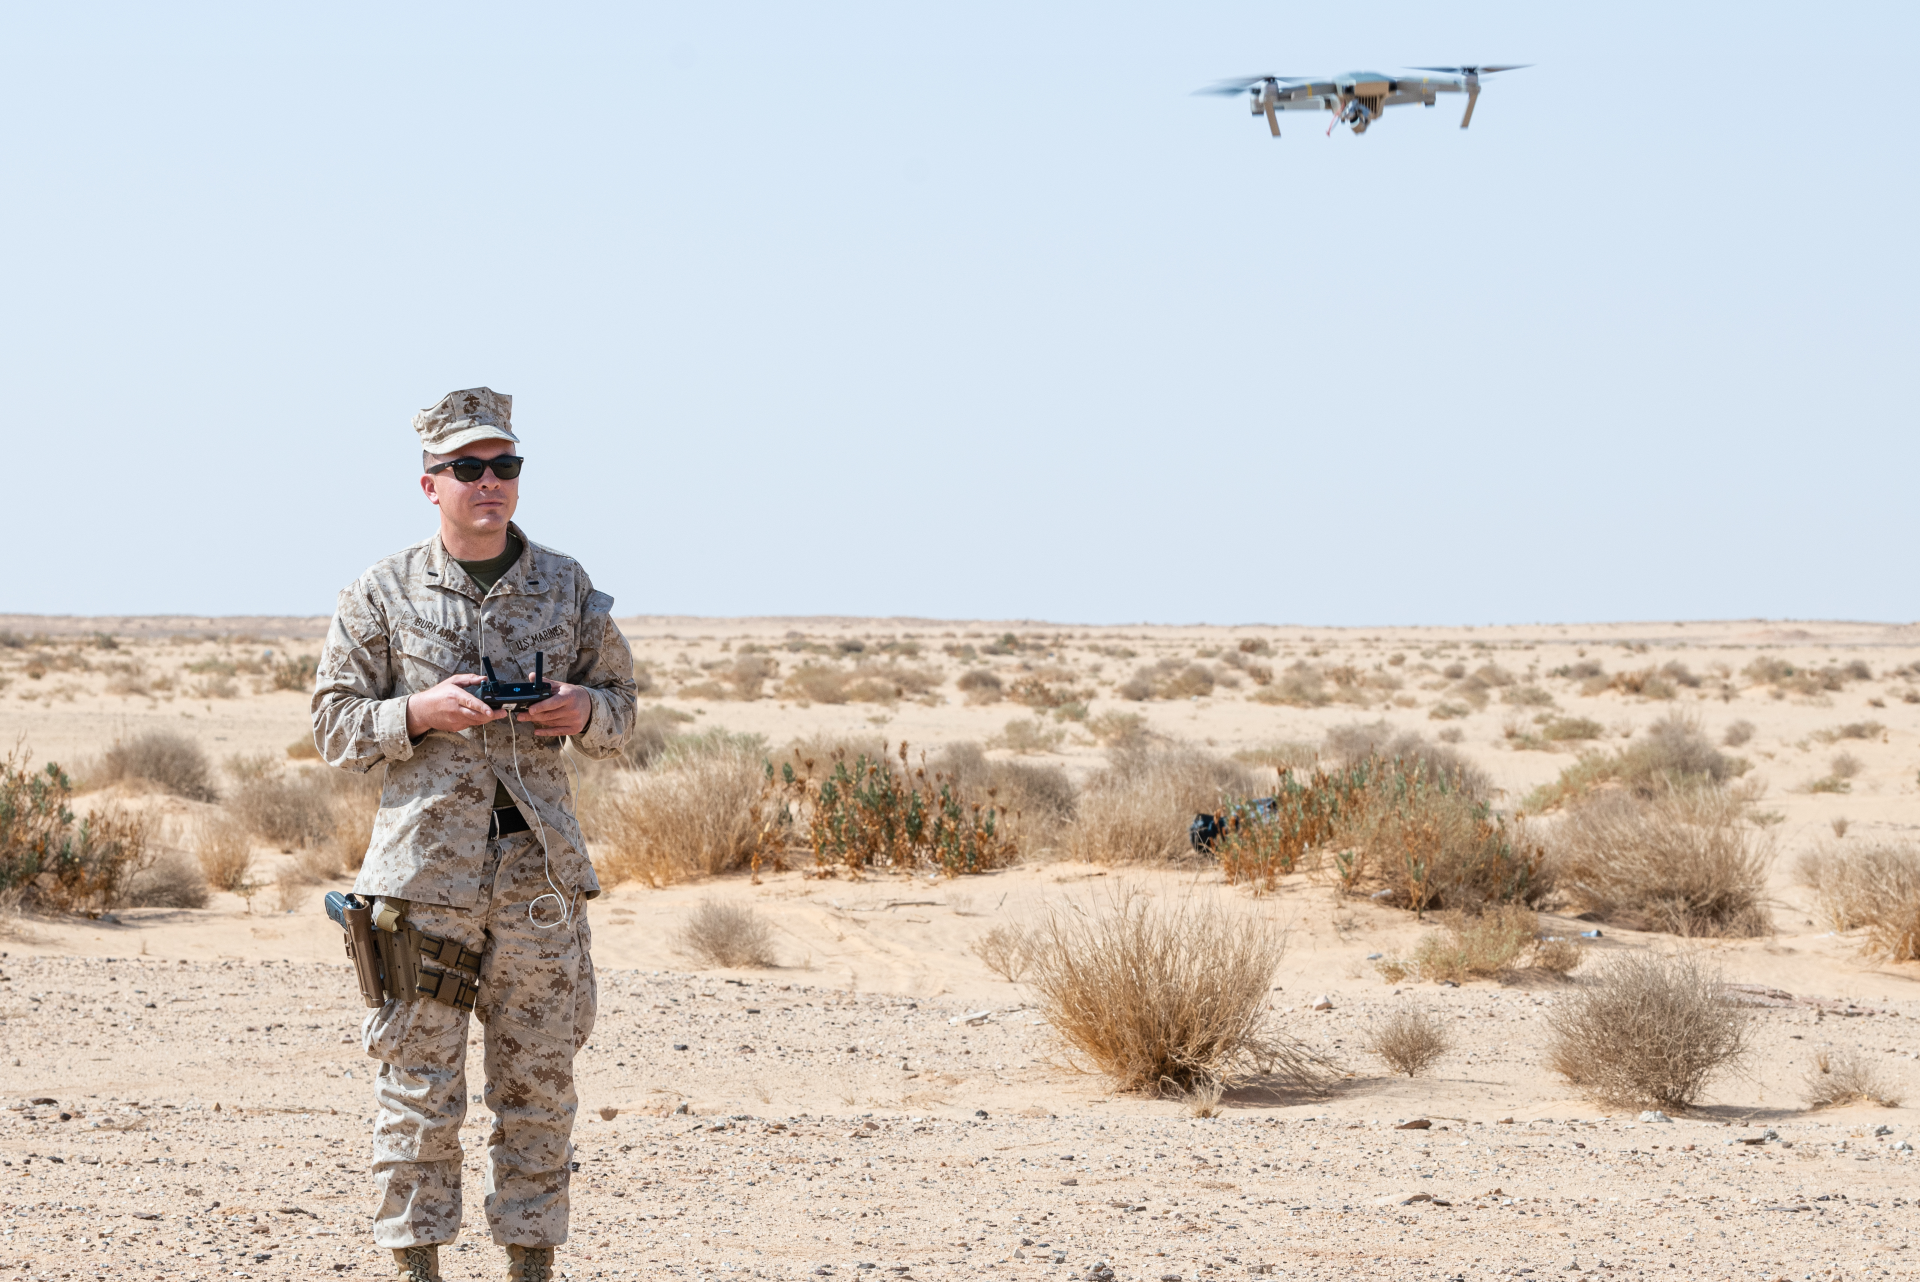 Personnel from the 378th Air Expeditionary Wing trained with Royal Saudi Air Force Police Wing members in a joint counter unmanned aerial system exercise Jan. 27, 2021 at Prince Sultan Air Base, Kingdom of Saudi Arabia